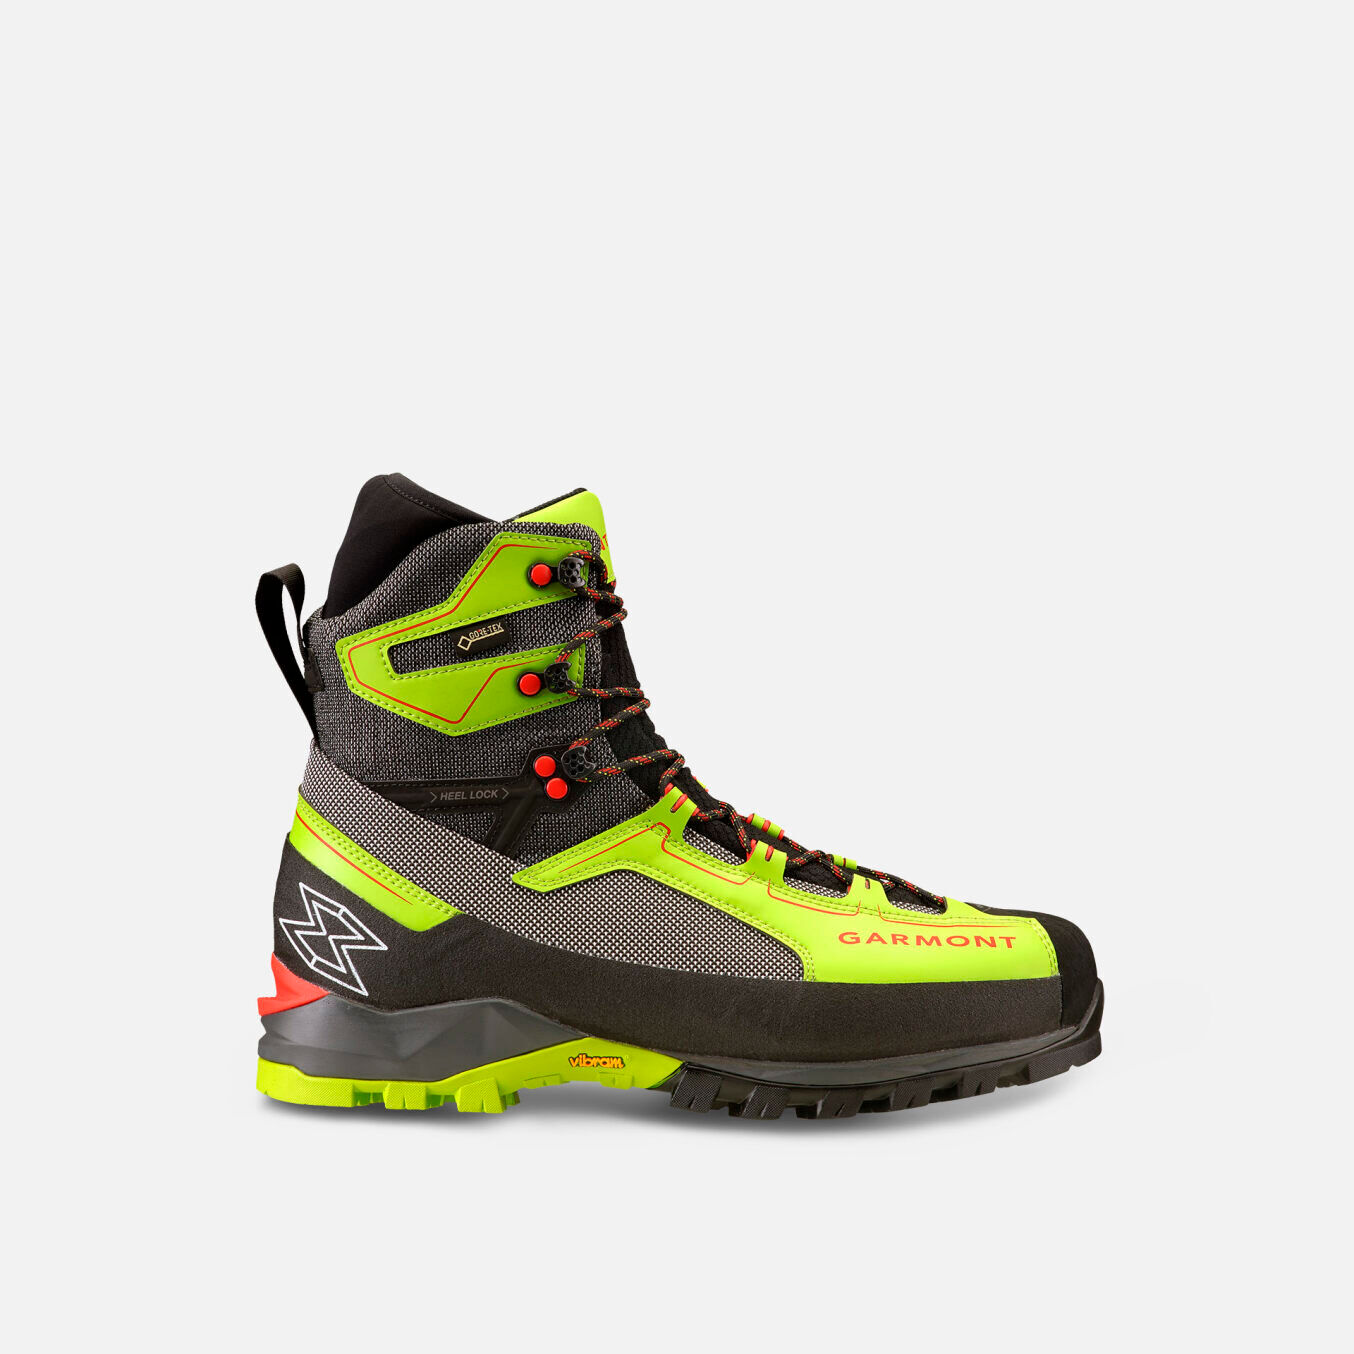 Garmont Tower 2.0 Extreme GTX - Mountaineering boots